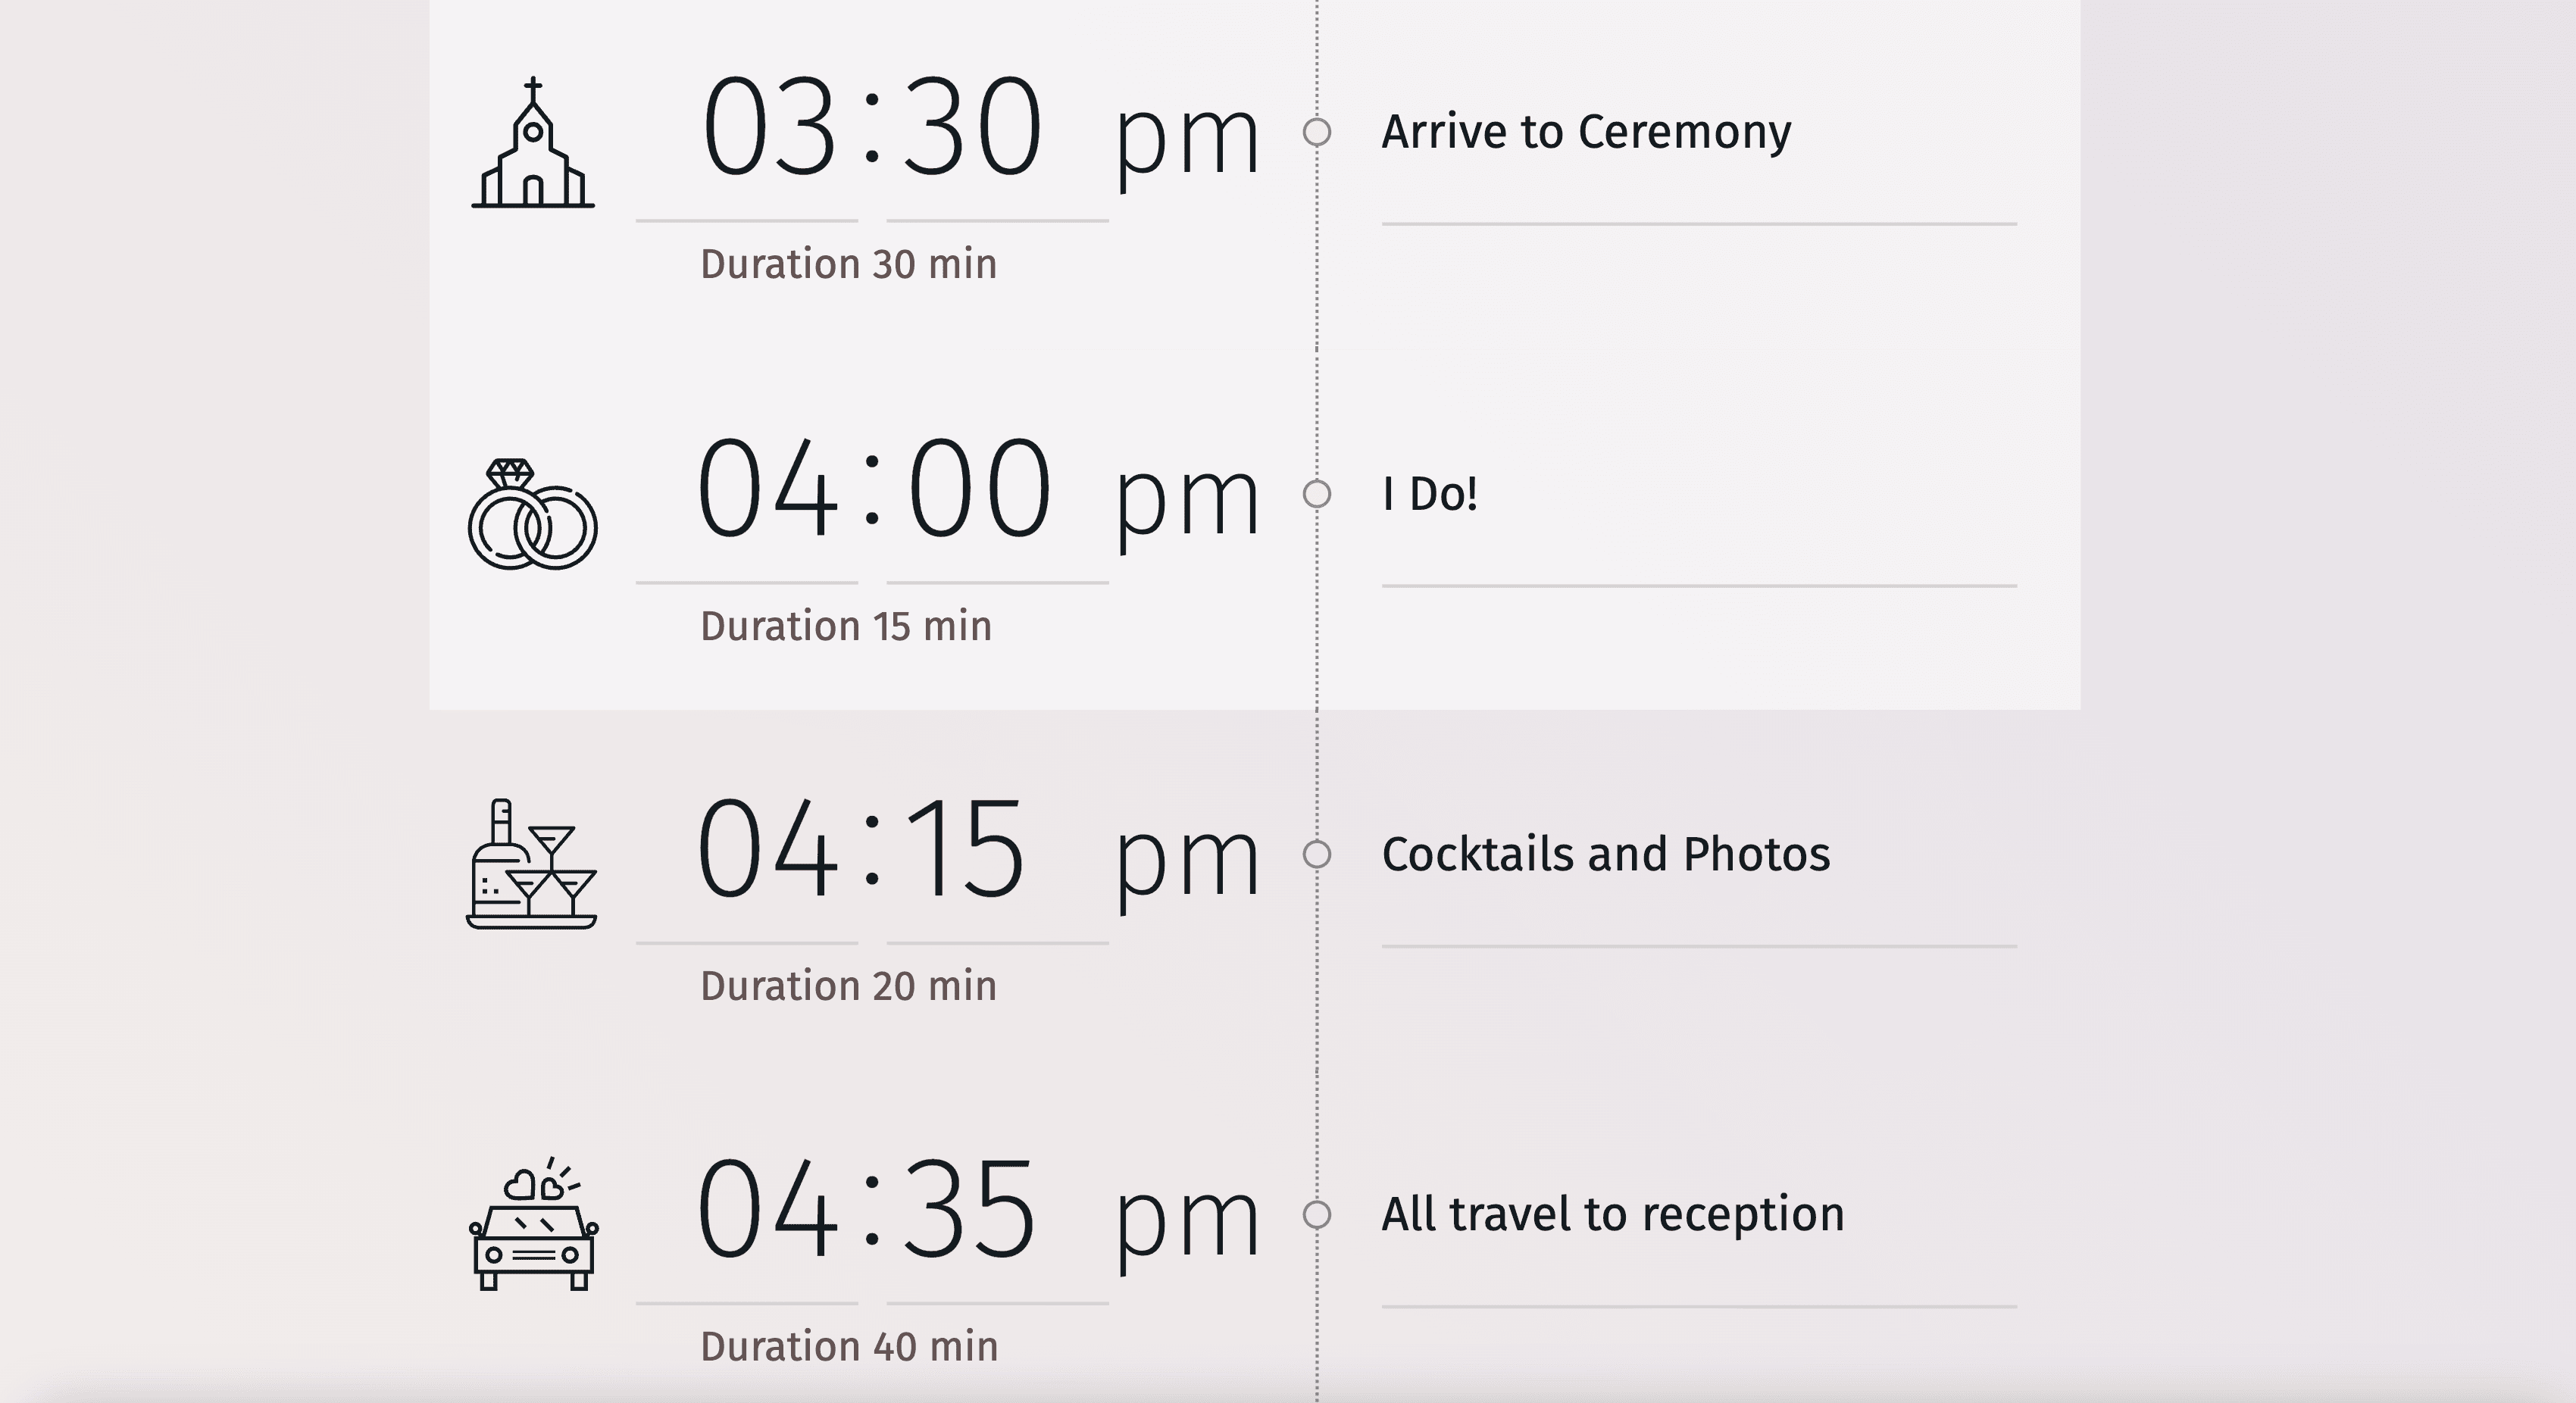 Standard wedding day schedule shown in a chronological timeline format.